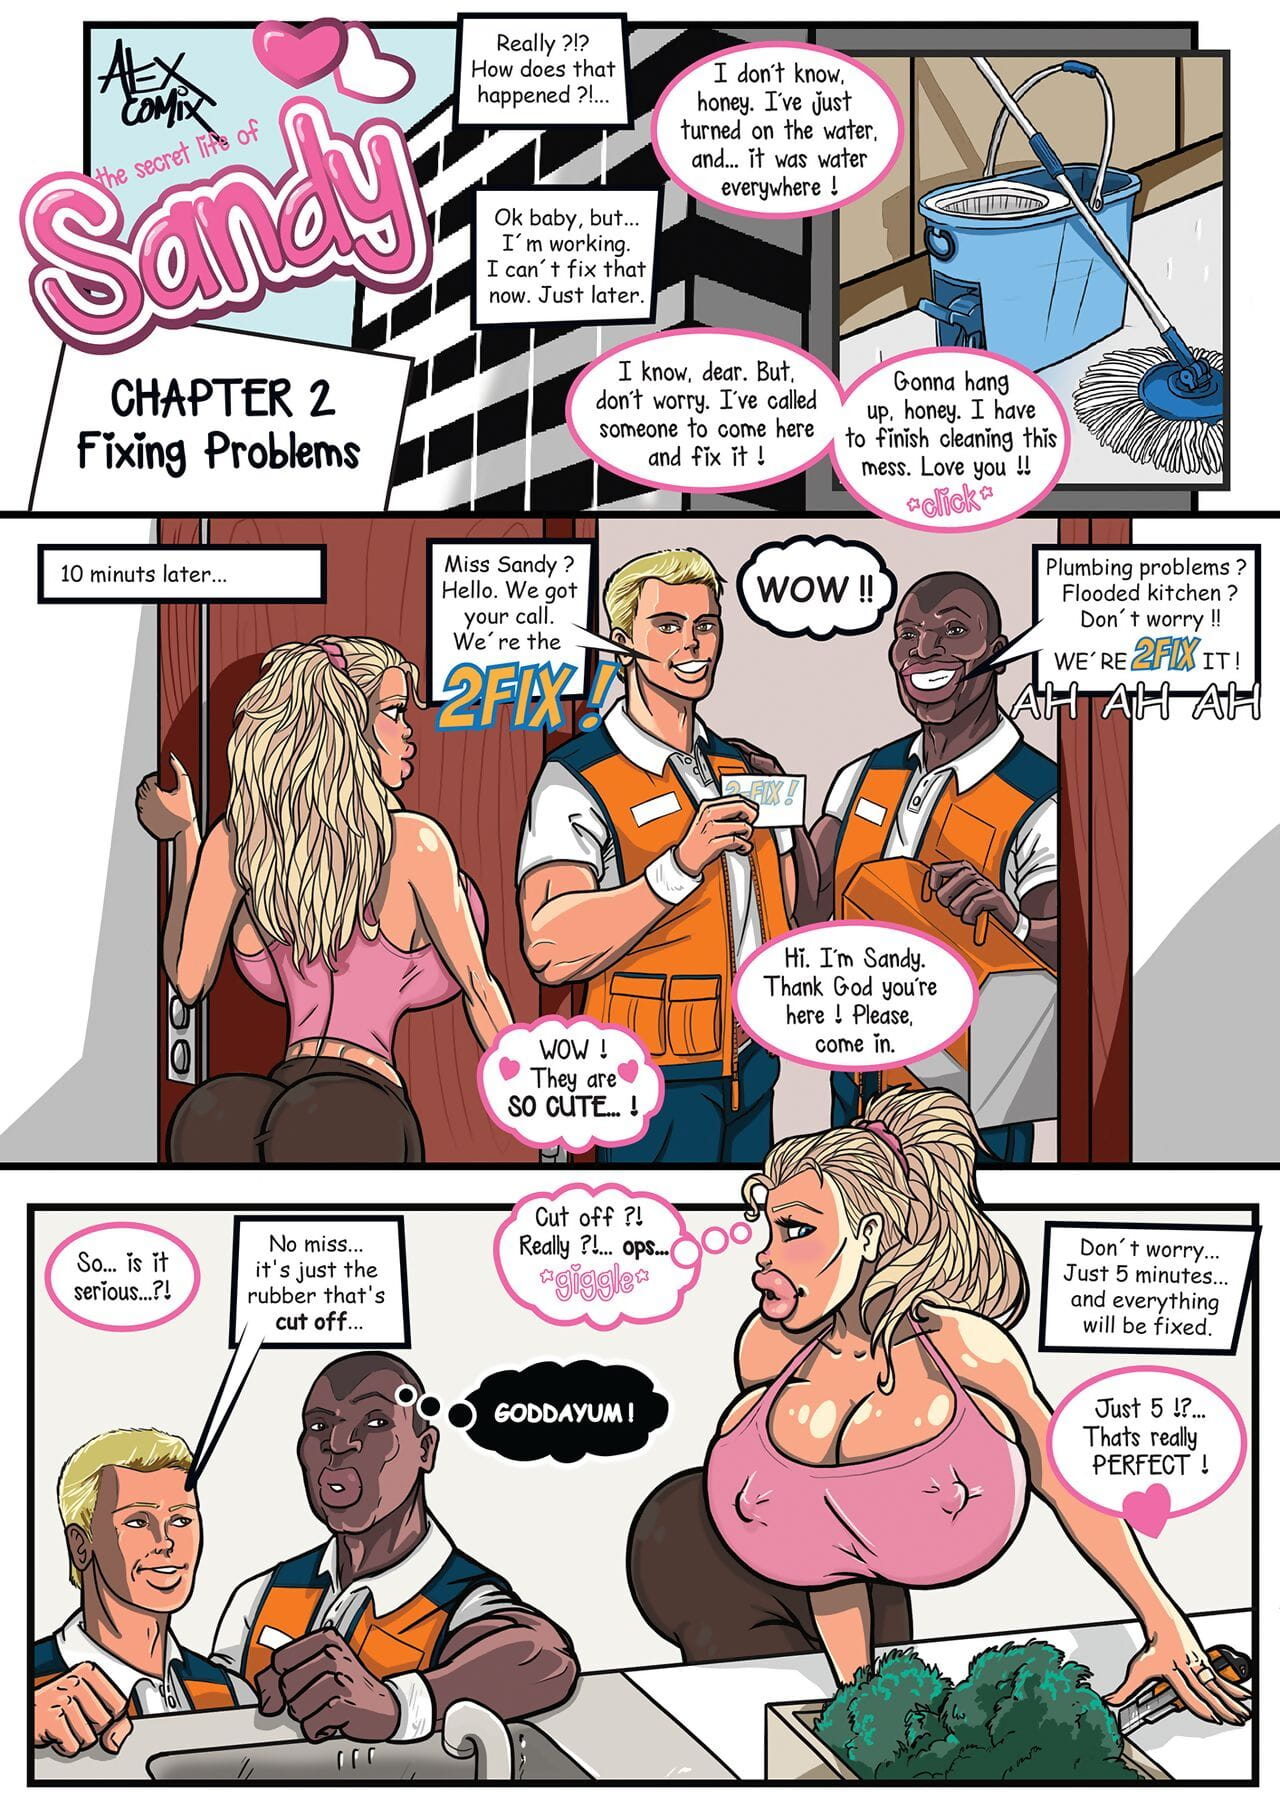 The Secret Life of Sandy Ch. 1-5 page 1